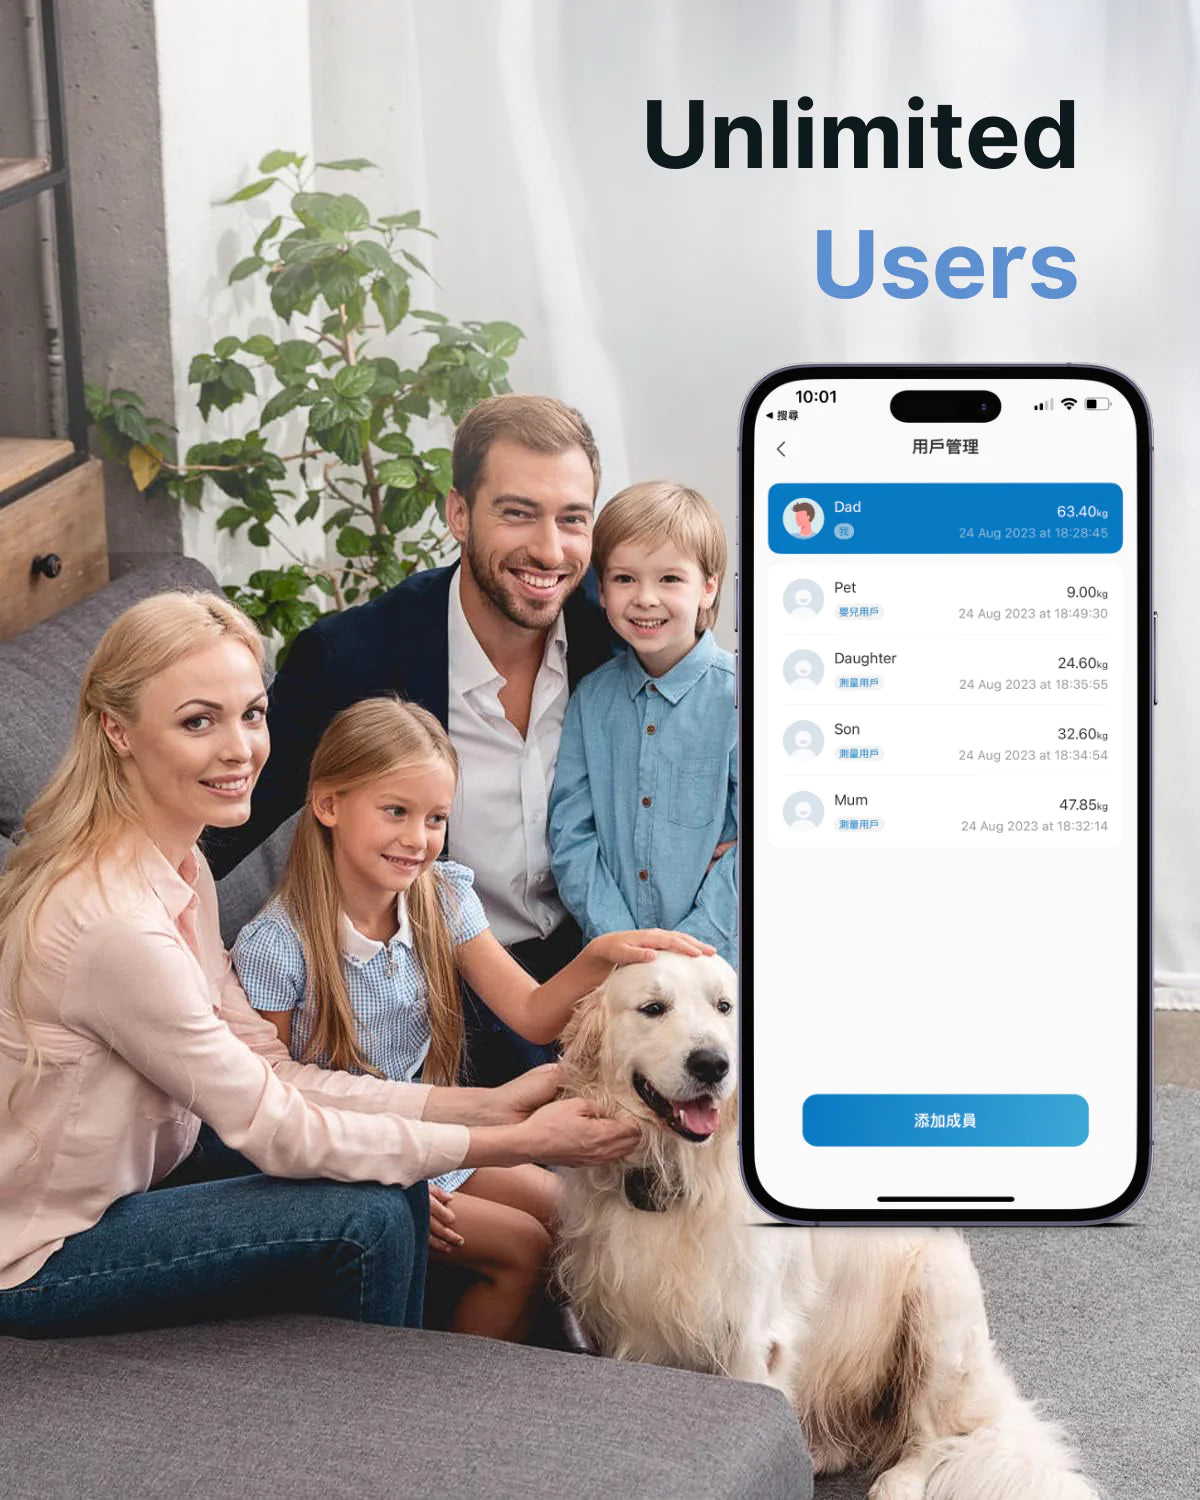 A happy family of four with their dog sitting on a couch, looking at a smartphone displaying an app screen titled "Elis Aspire Smart Body Scale.